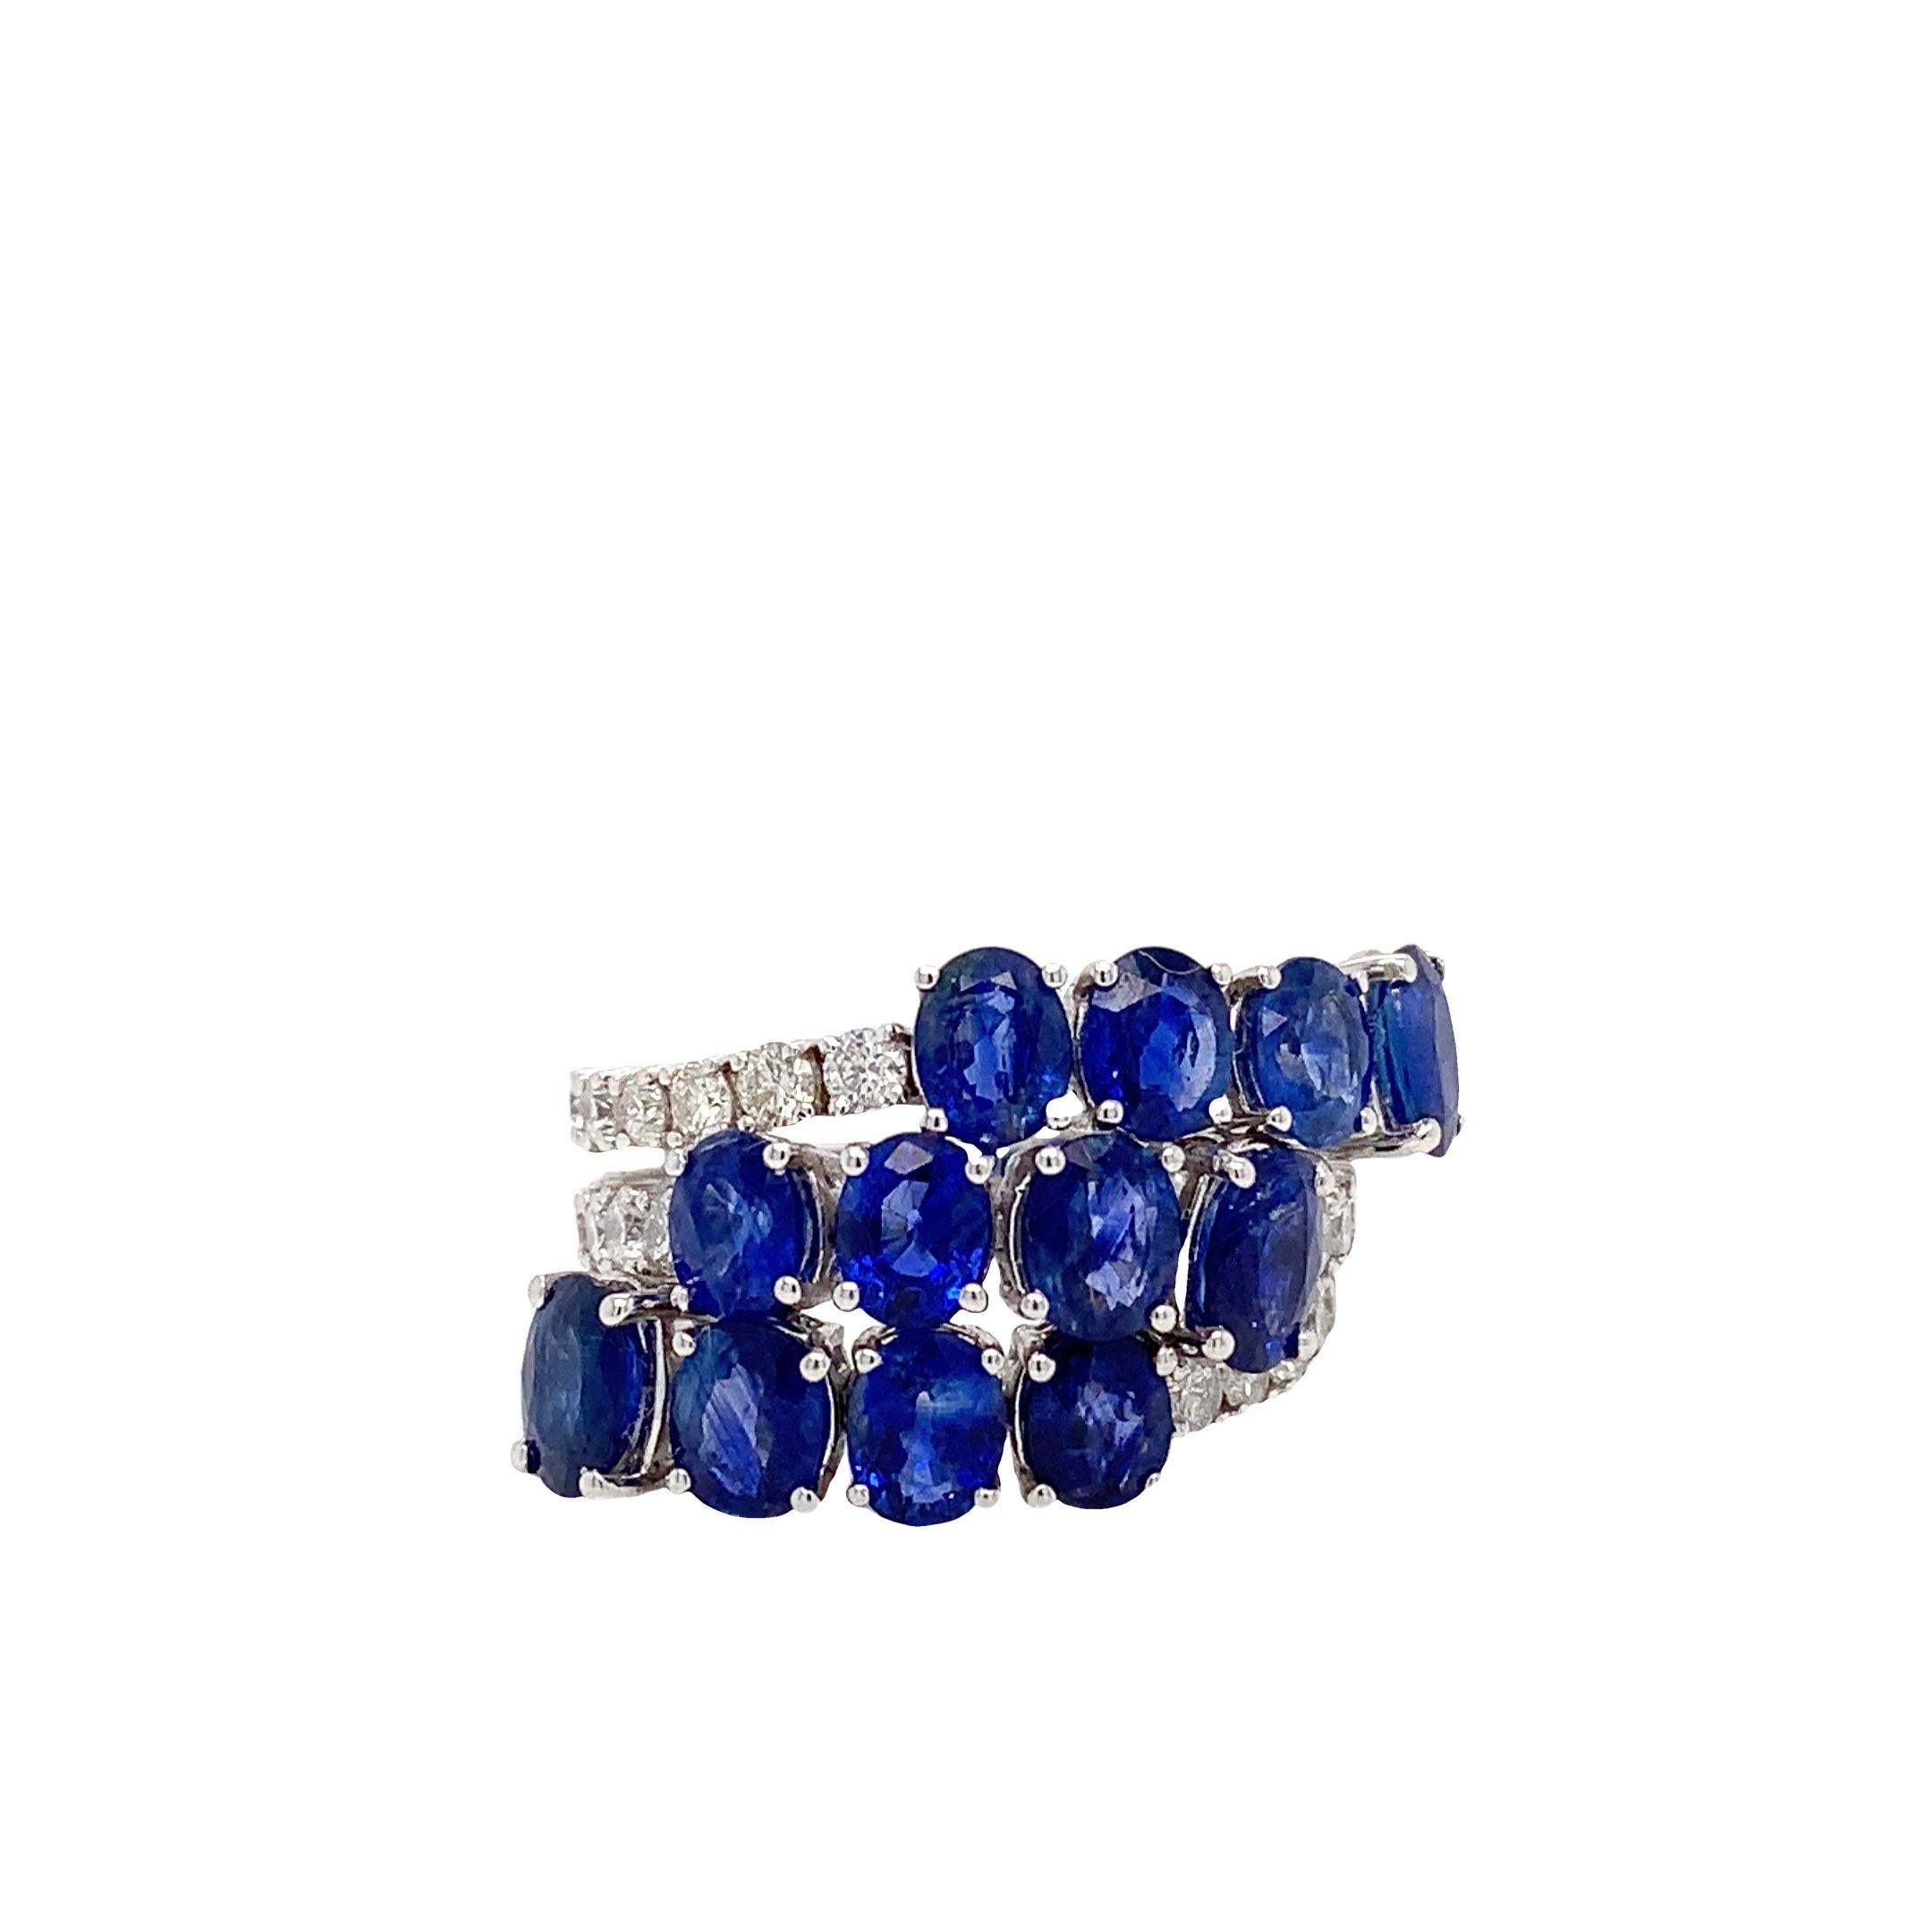 18K White Gold
Blue oval sapphires: 5.89ct total weight.
Diamonds: 1.51ct total weight.
All diamonds are G-H/SI stones.
Width of the ring -  is approximately 1.7cm/0.66inches.
